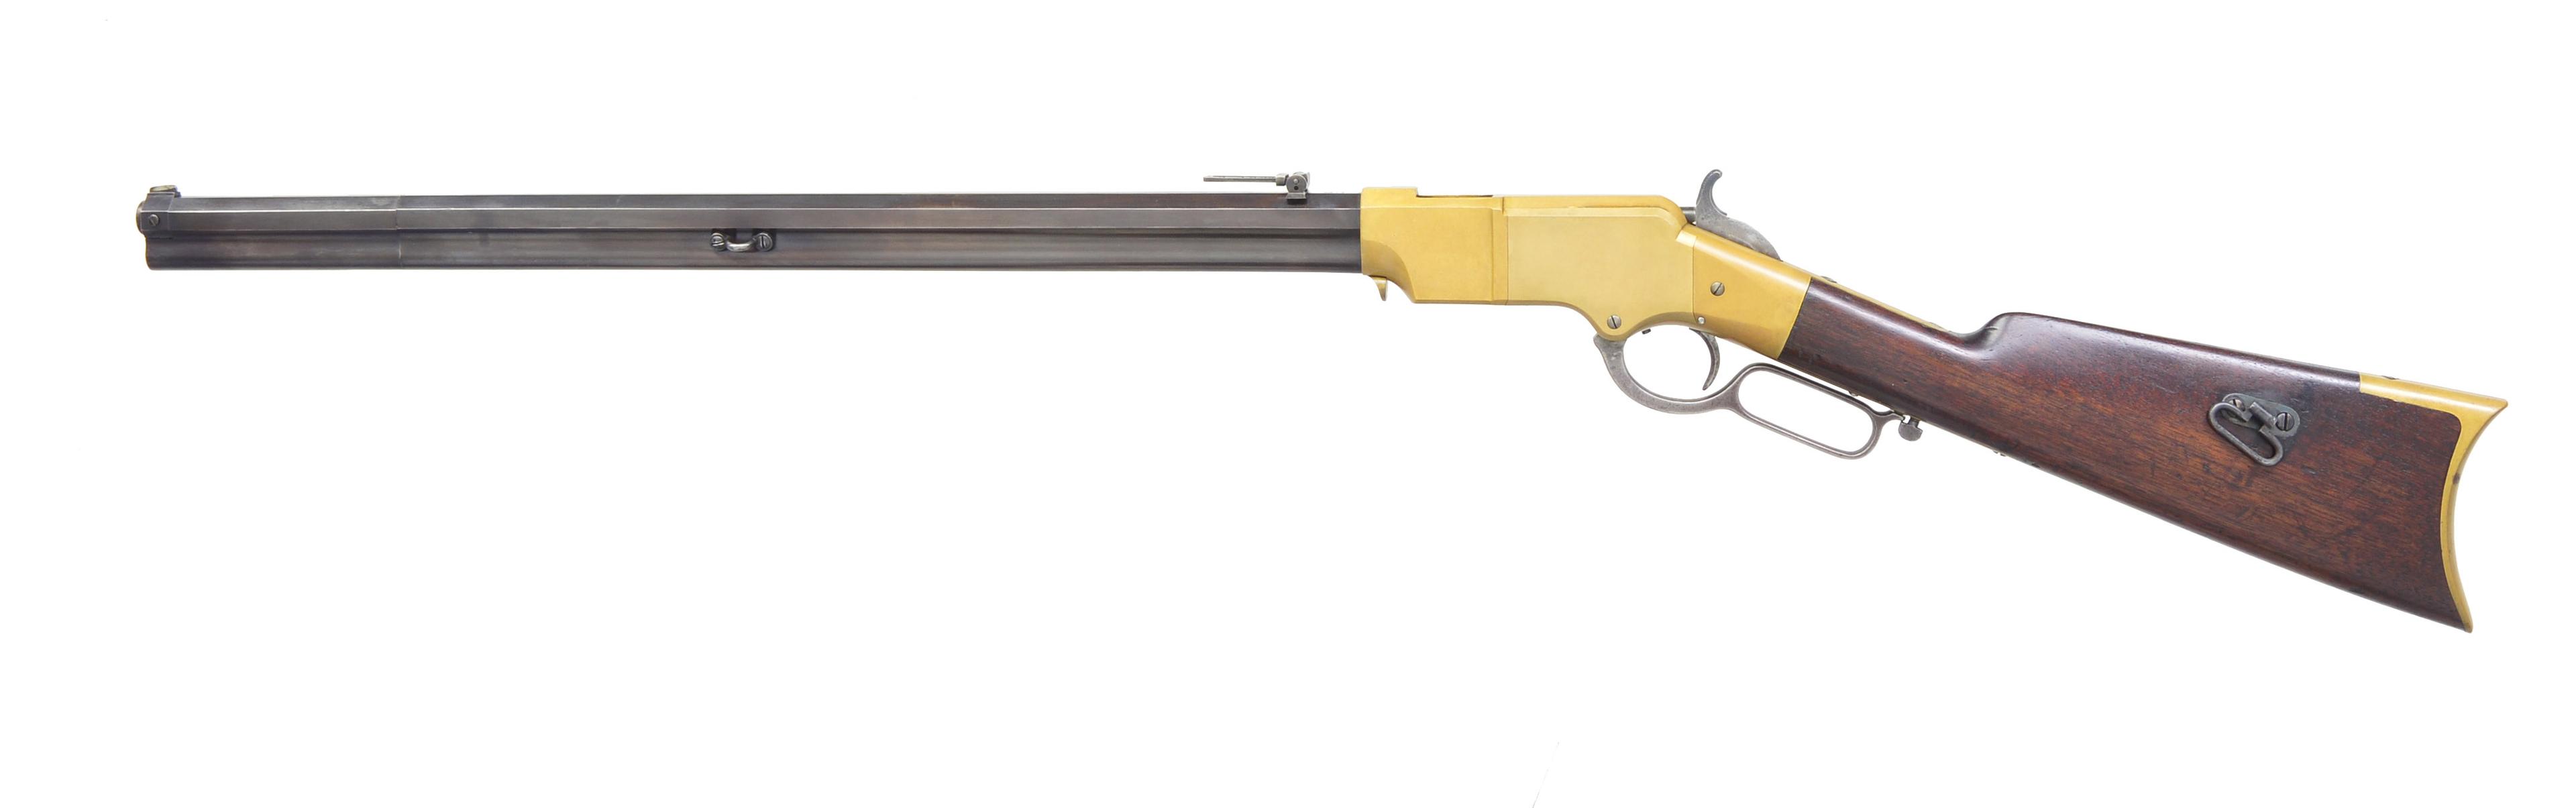 HENRY 1860 LEVER ACTION REPEATING RIFLE.